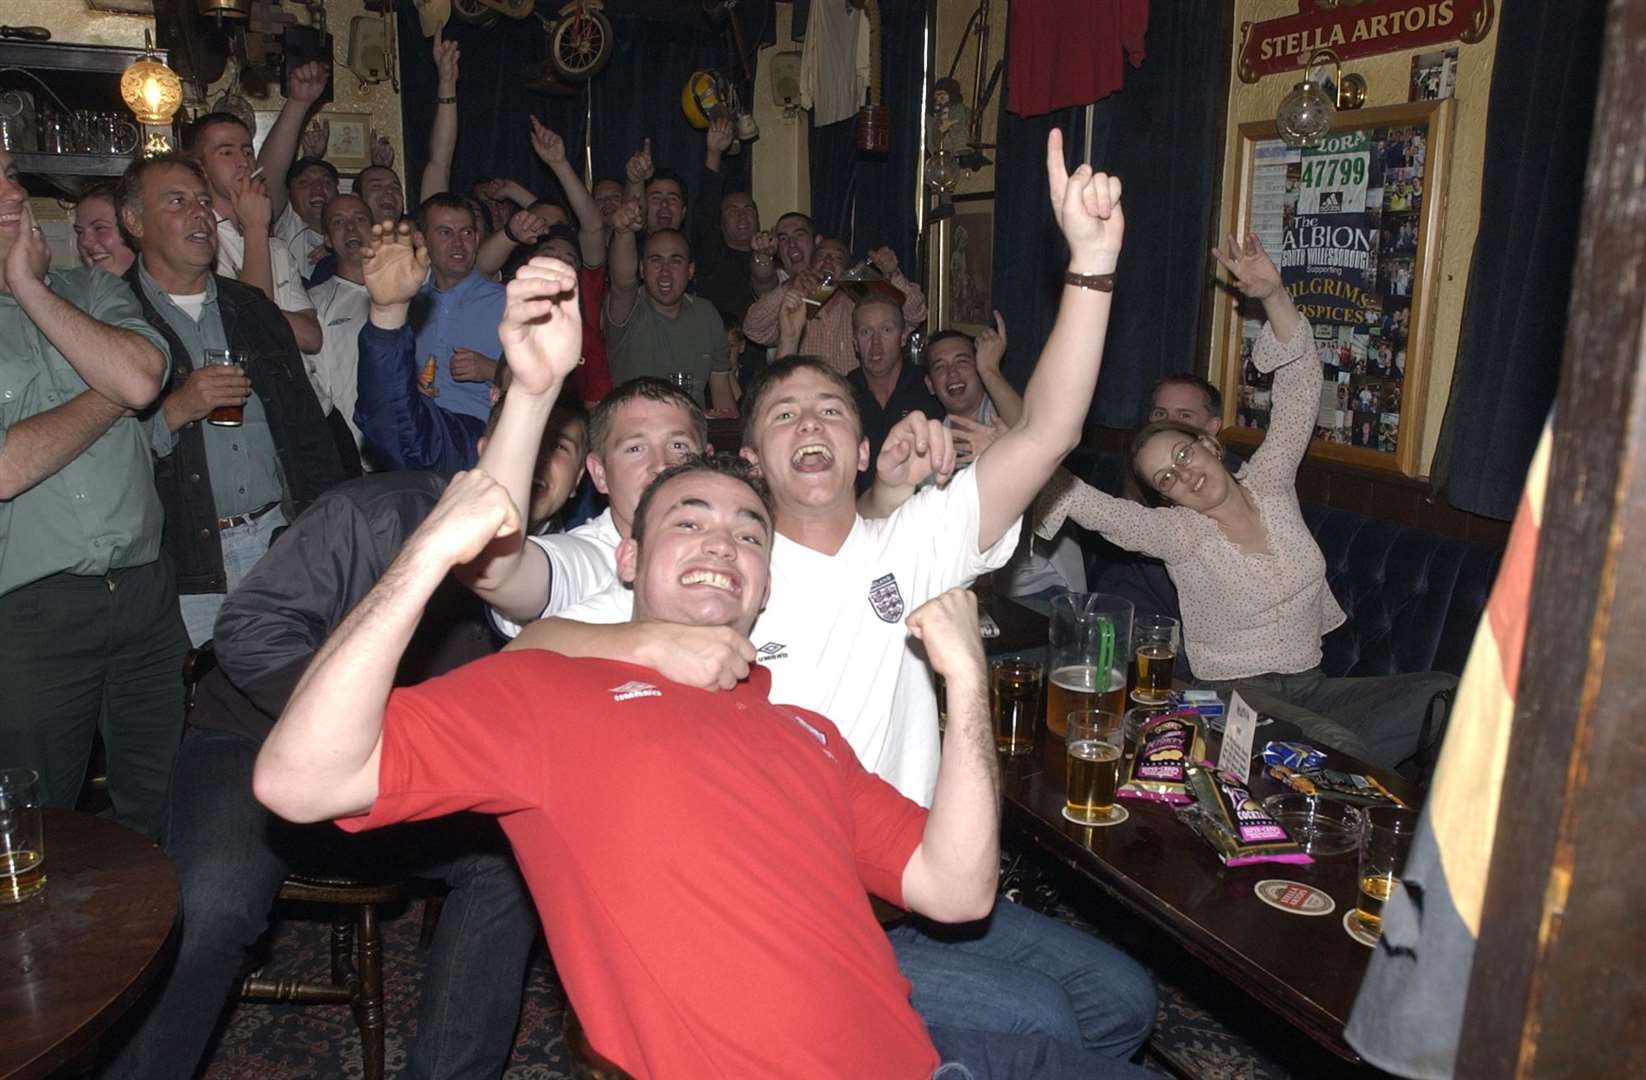 England fans at The Albion, Willesborough, celebrate their team's victory over Argentina in 2002